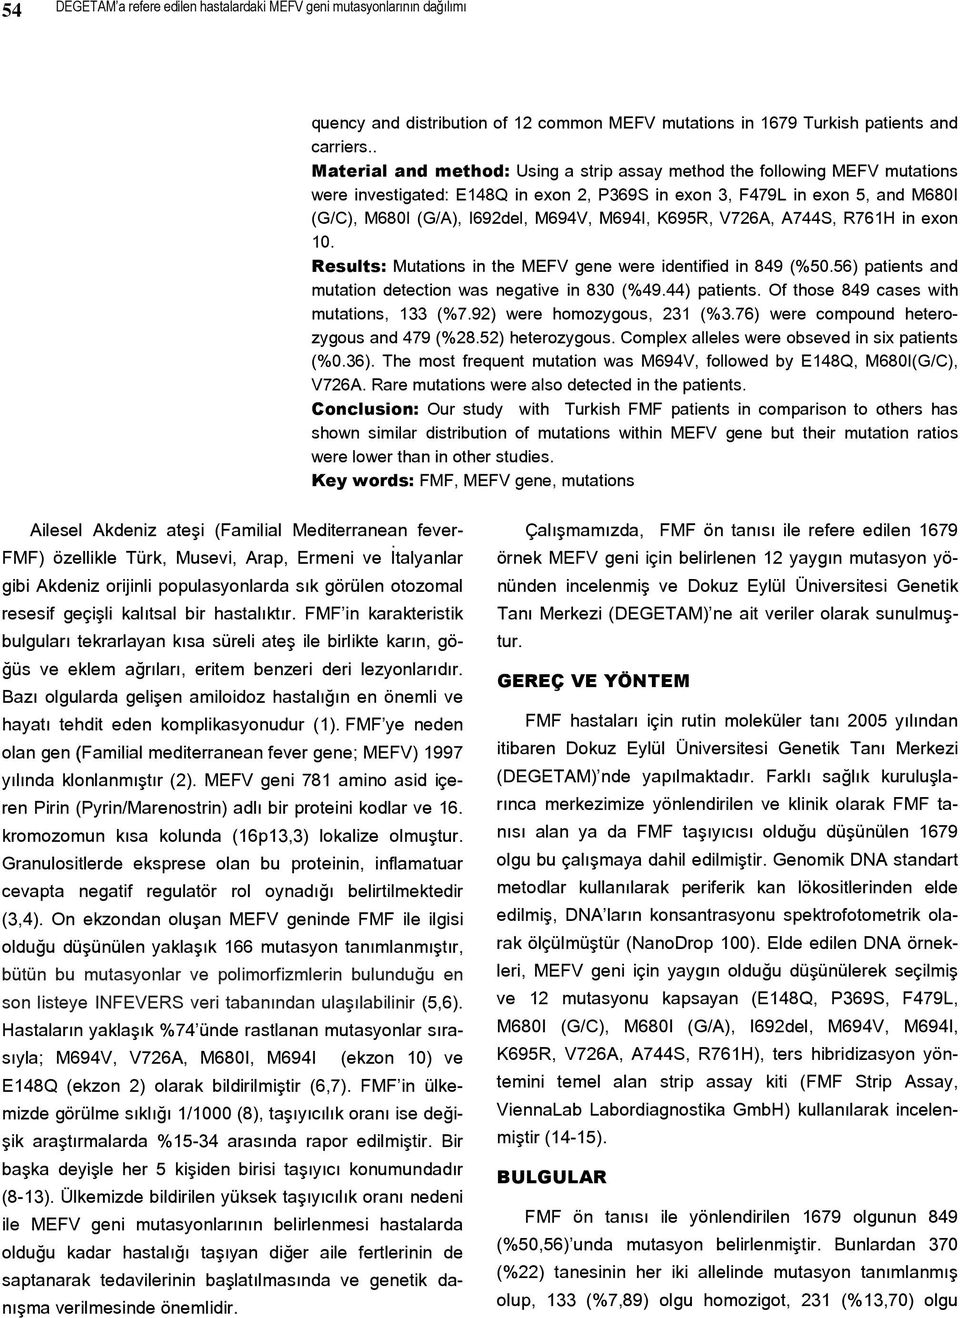 M694I, K695R, V726A, A744S, R761H in exon 10. Results: Mutations in the MEFV gene were identified in 849 (%50.56) patients and mutation detection was negative in 830 (%49.44) patients.